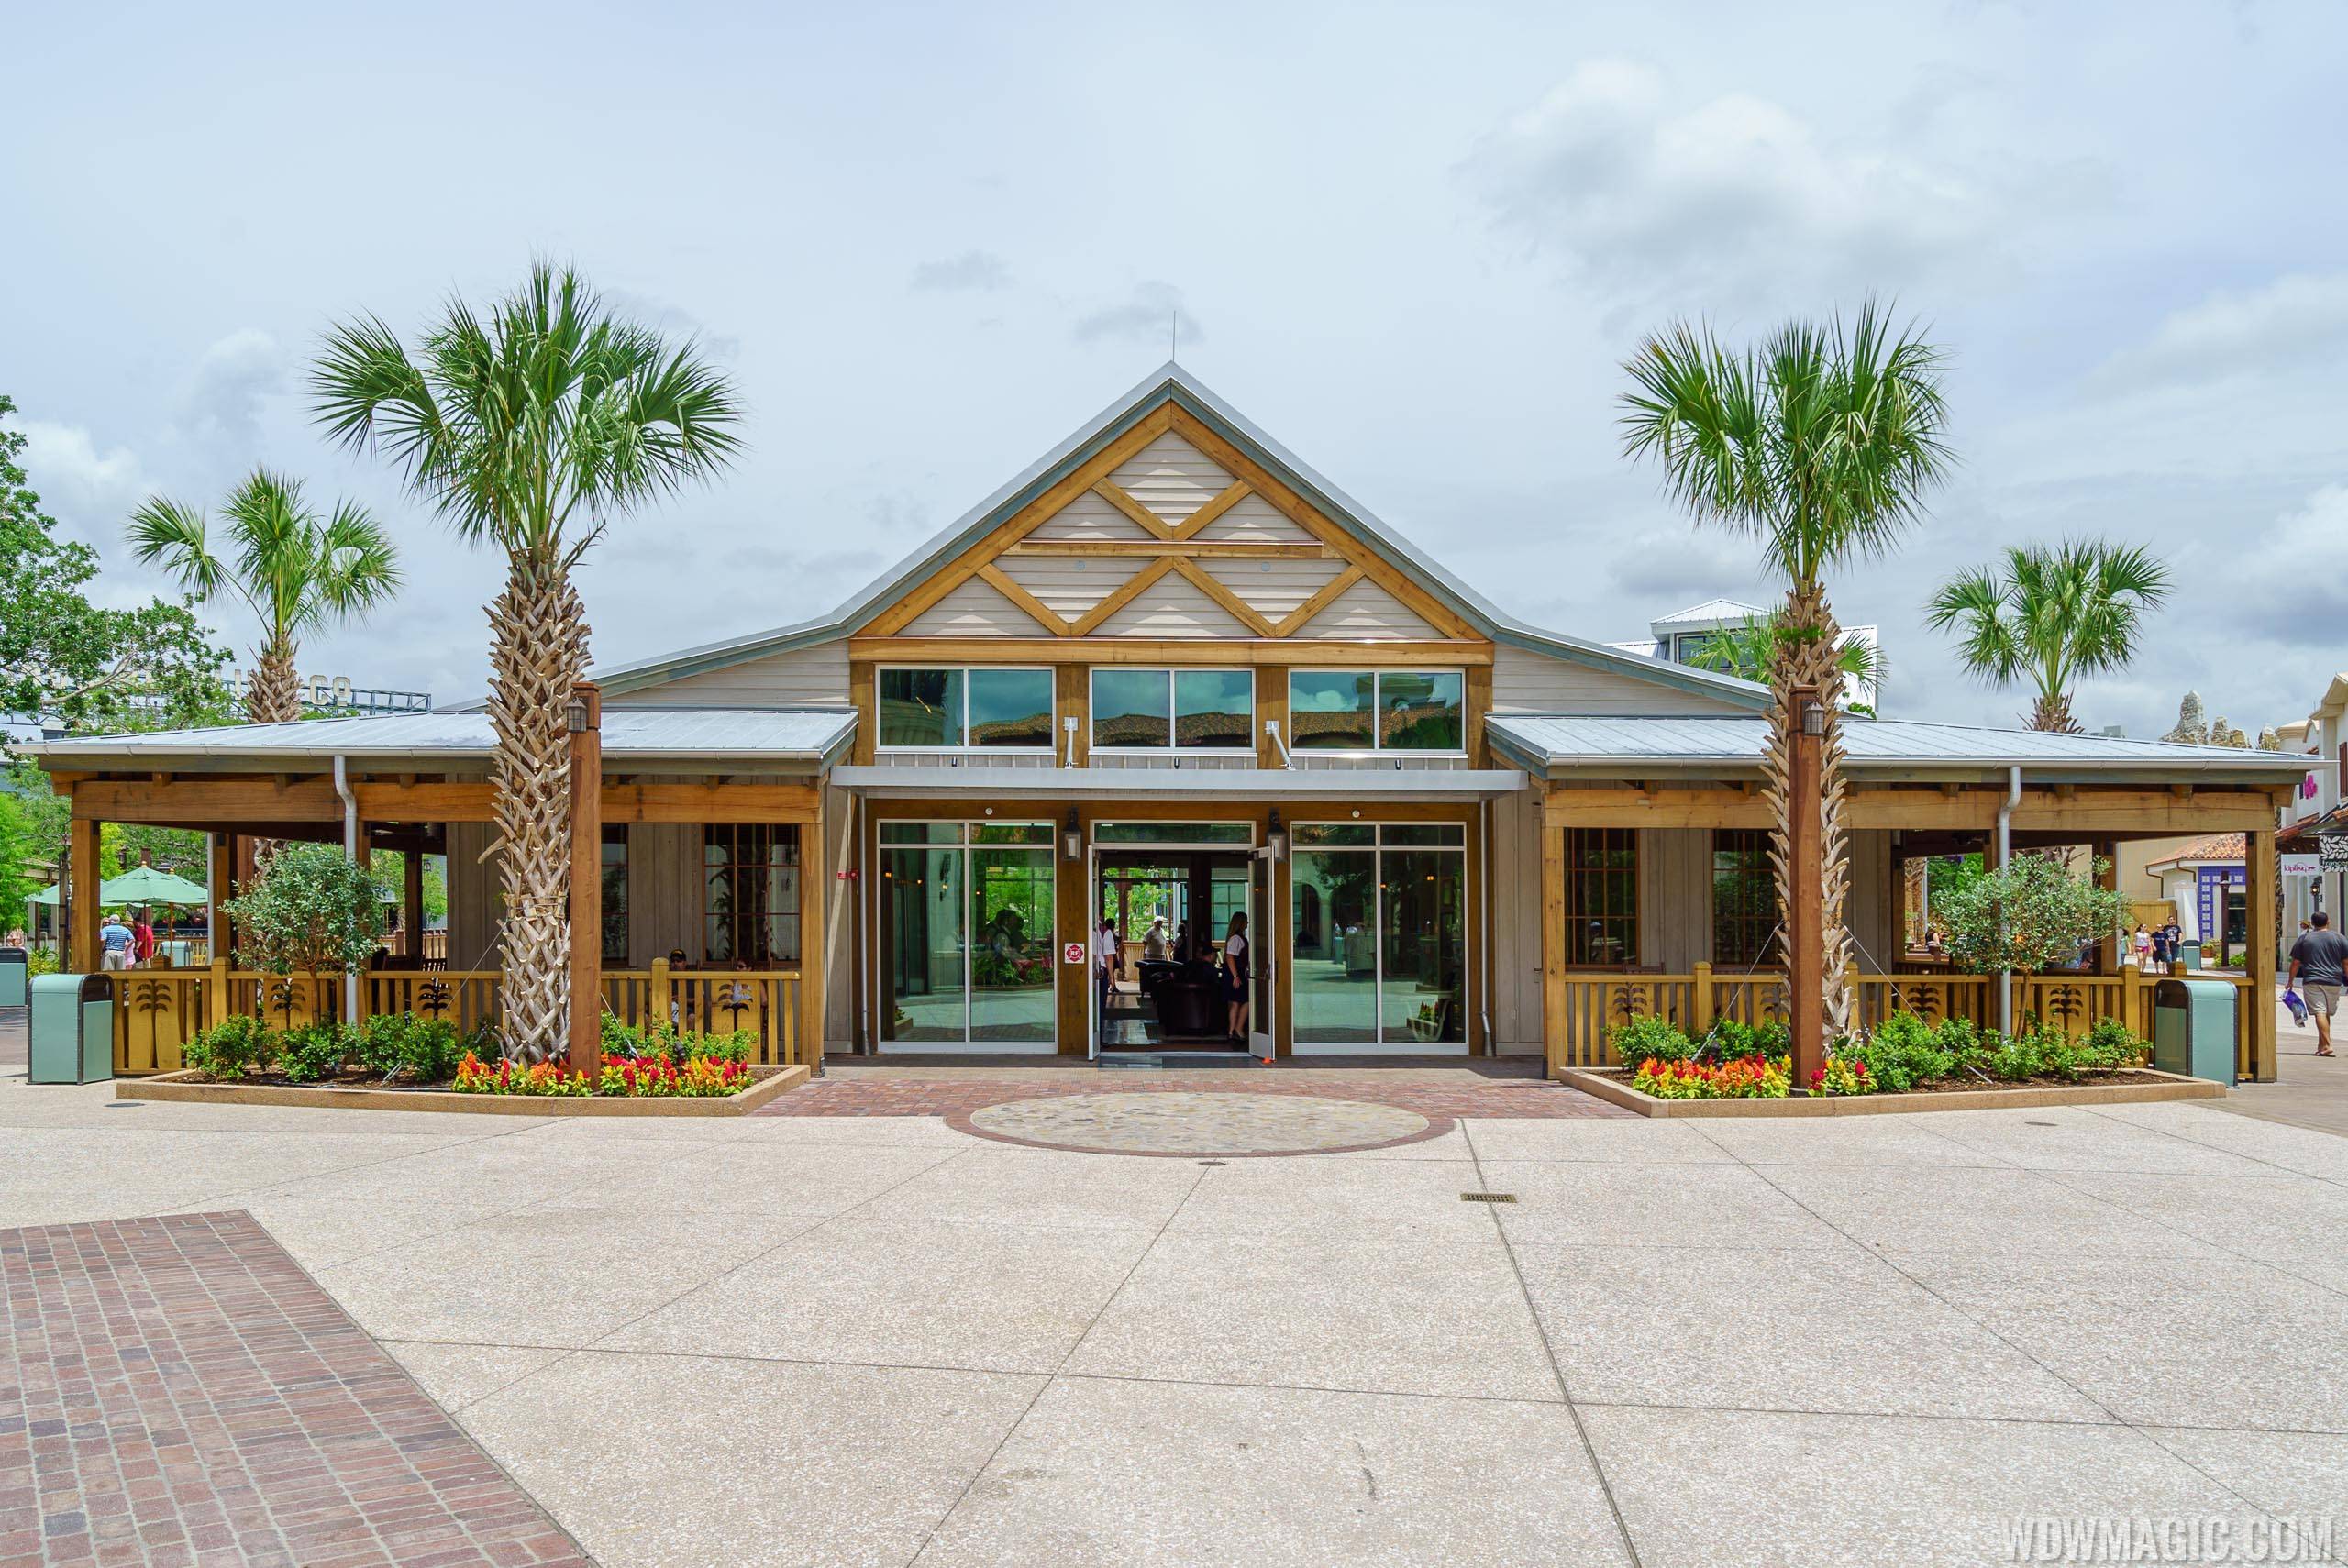 PHOTOS - Disney Springs guest relations moves to new Welcome Center in the Town Center